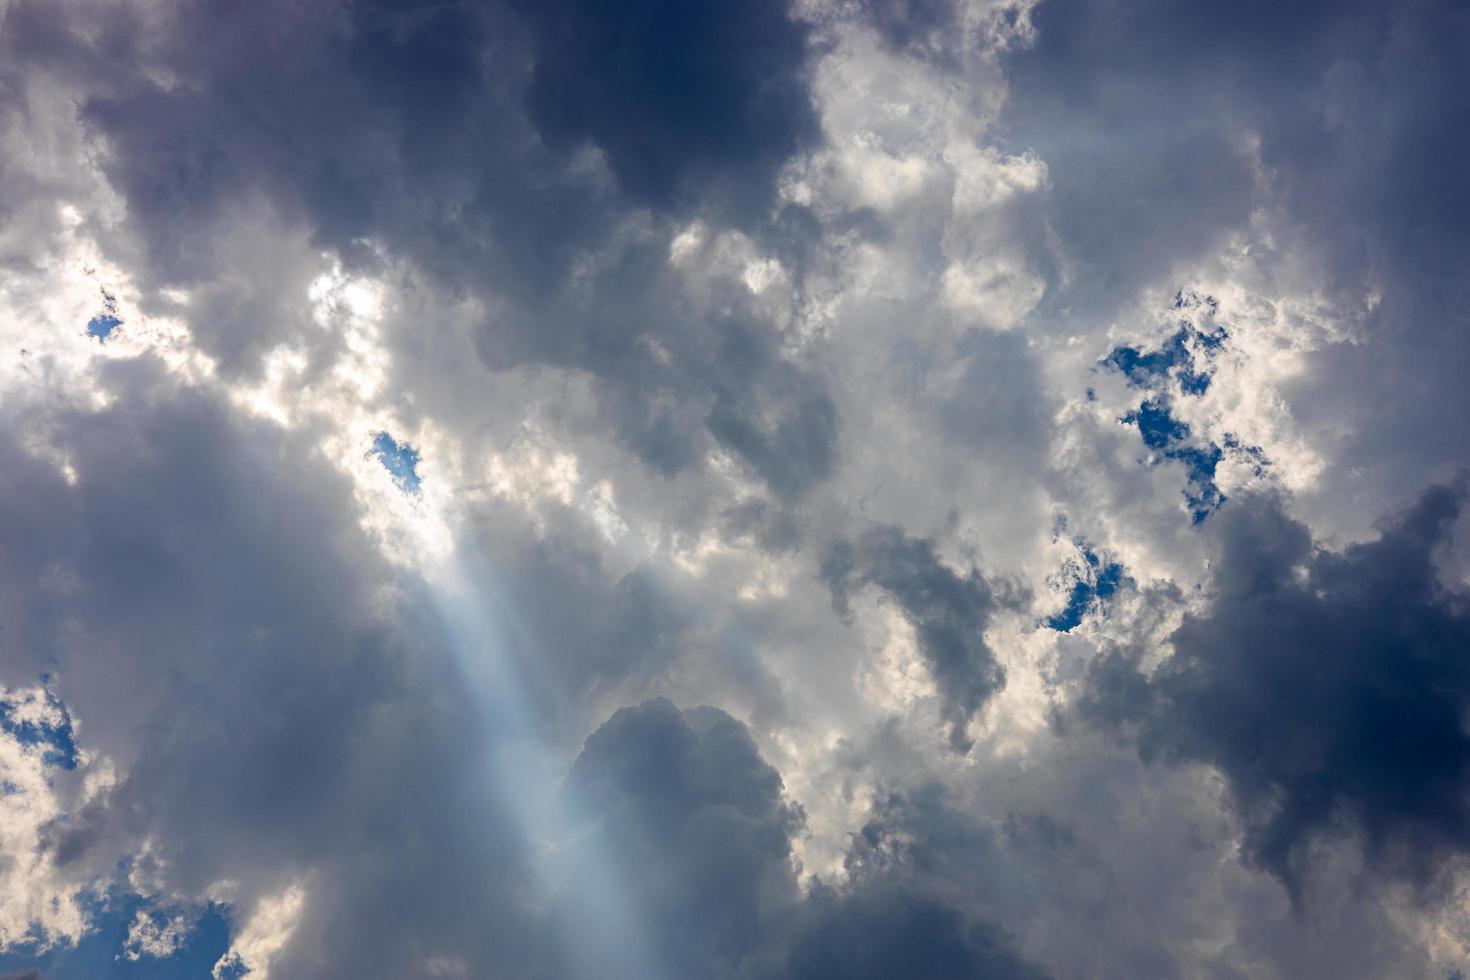 Background of a landscape of clouds with sunlight shining through. photo